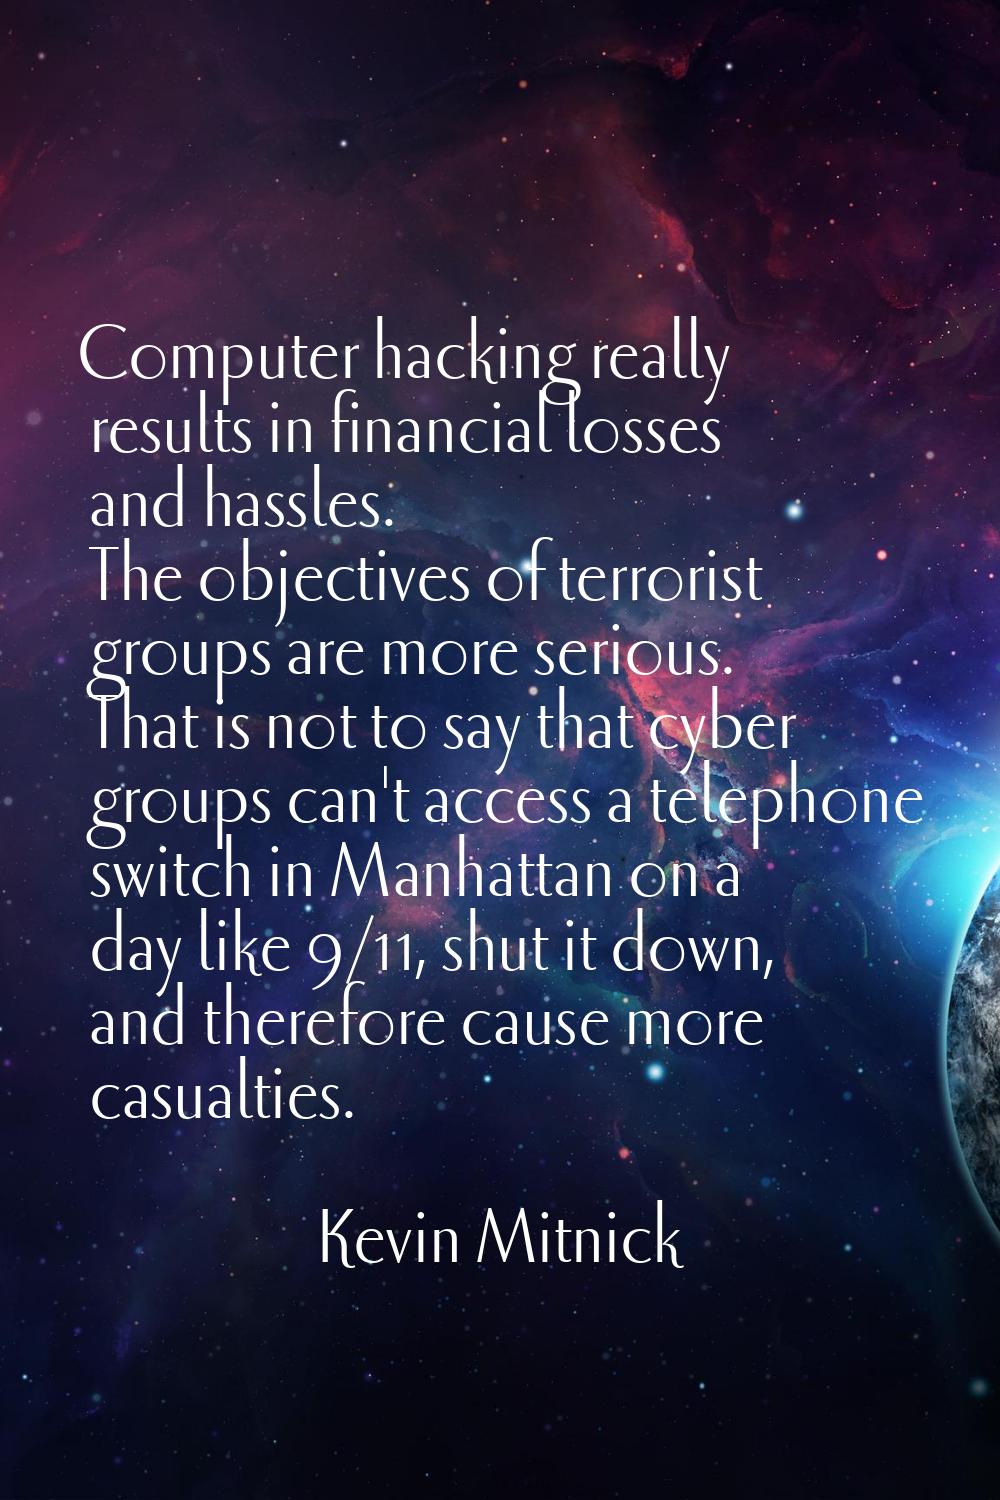 Computer hacking really results in financial losses and hassles. The objectives of terrorist groups